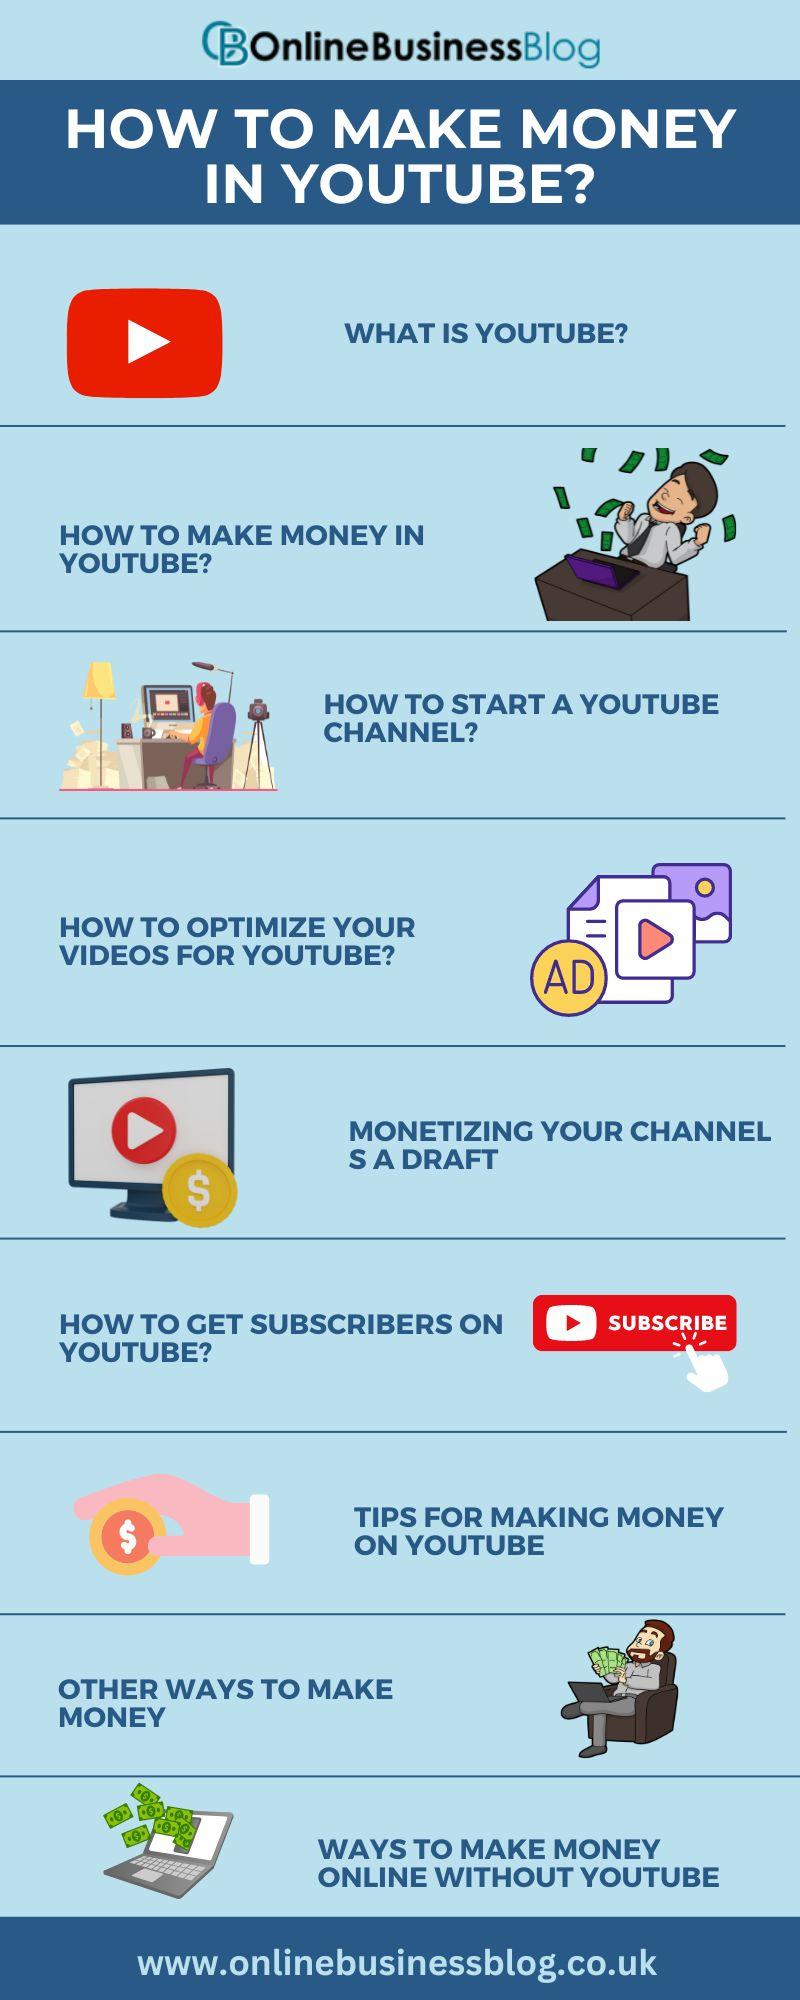 How to Make Money in Youtube